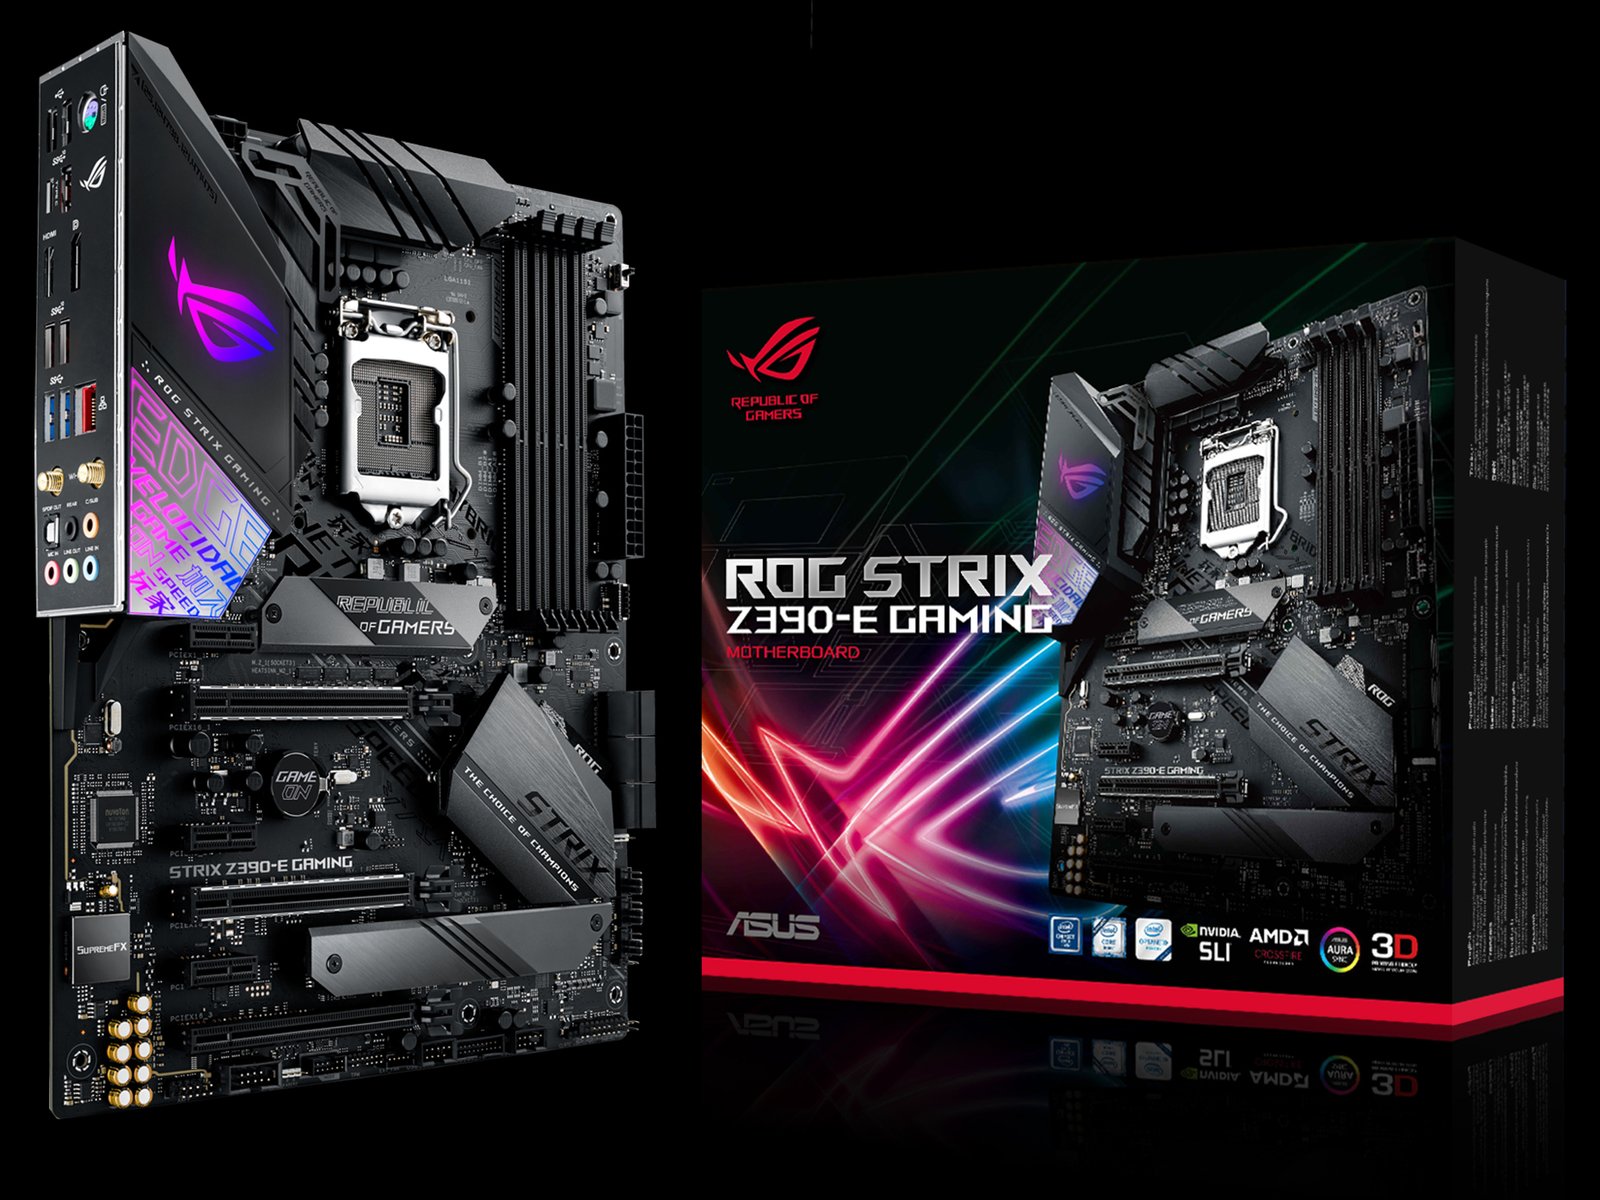 ASUS ROG Strix Z390-E Gaming Review: A Solid Foundation for Your Gaming Build